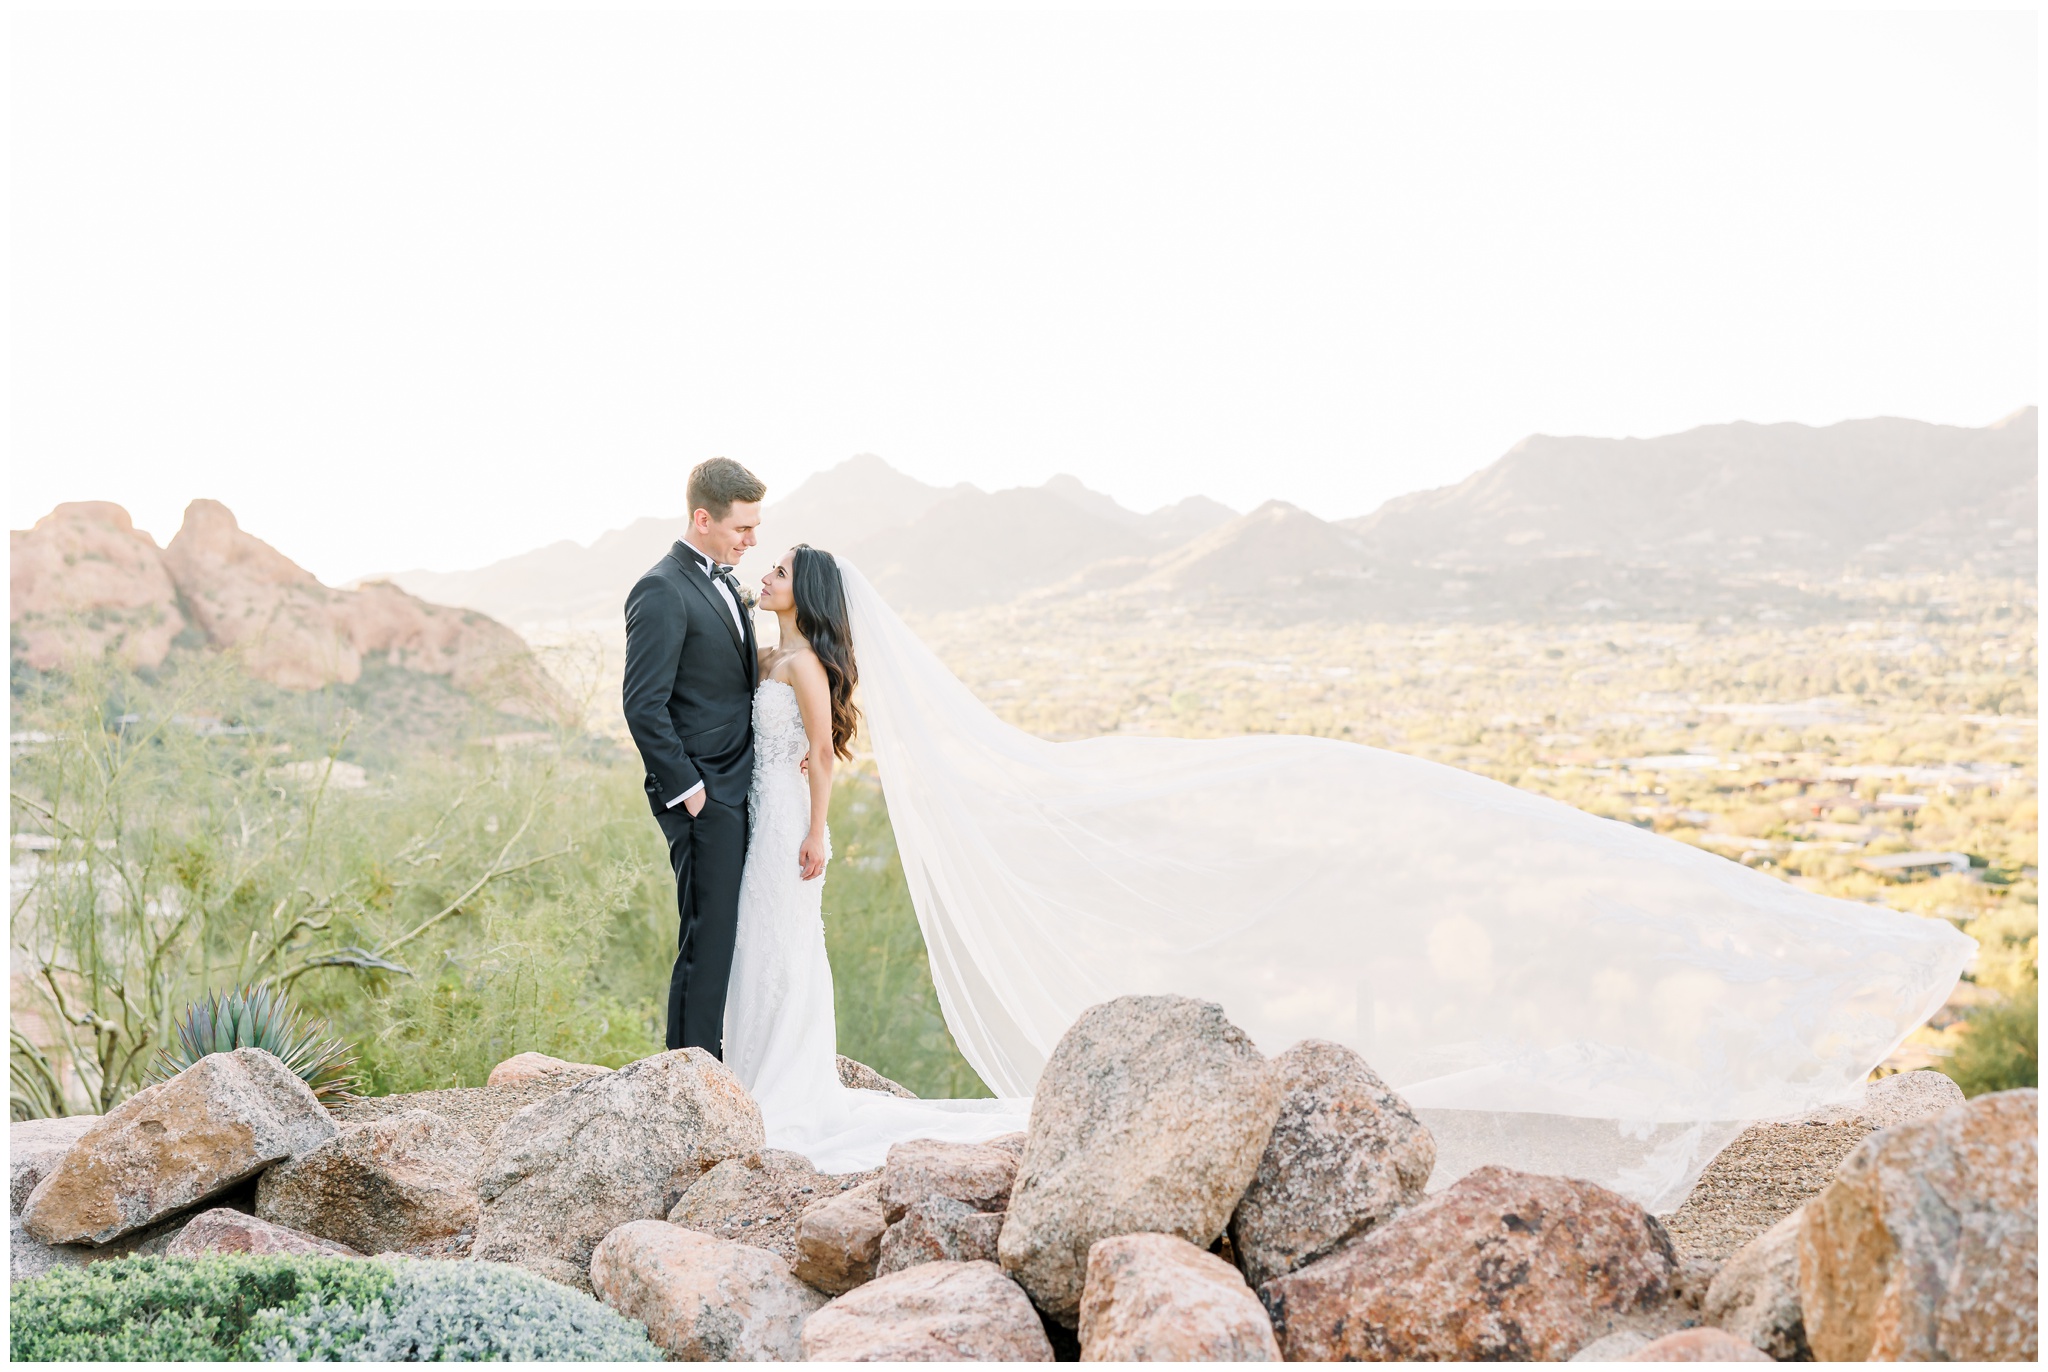 Husband and Wife sunset portraits at Sanctuary at Camelback